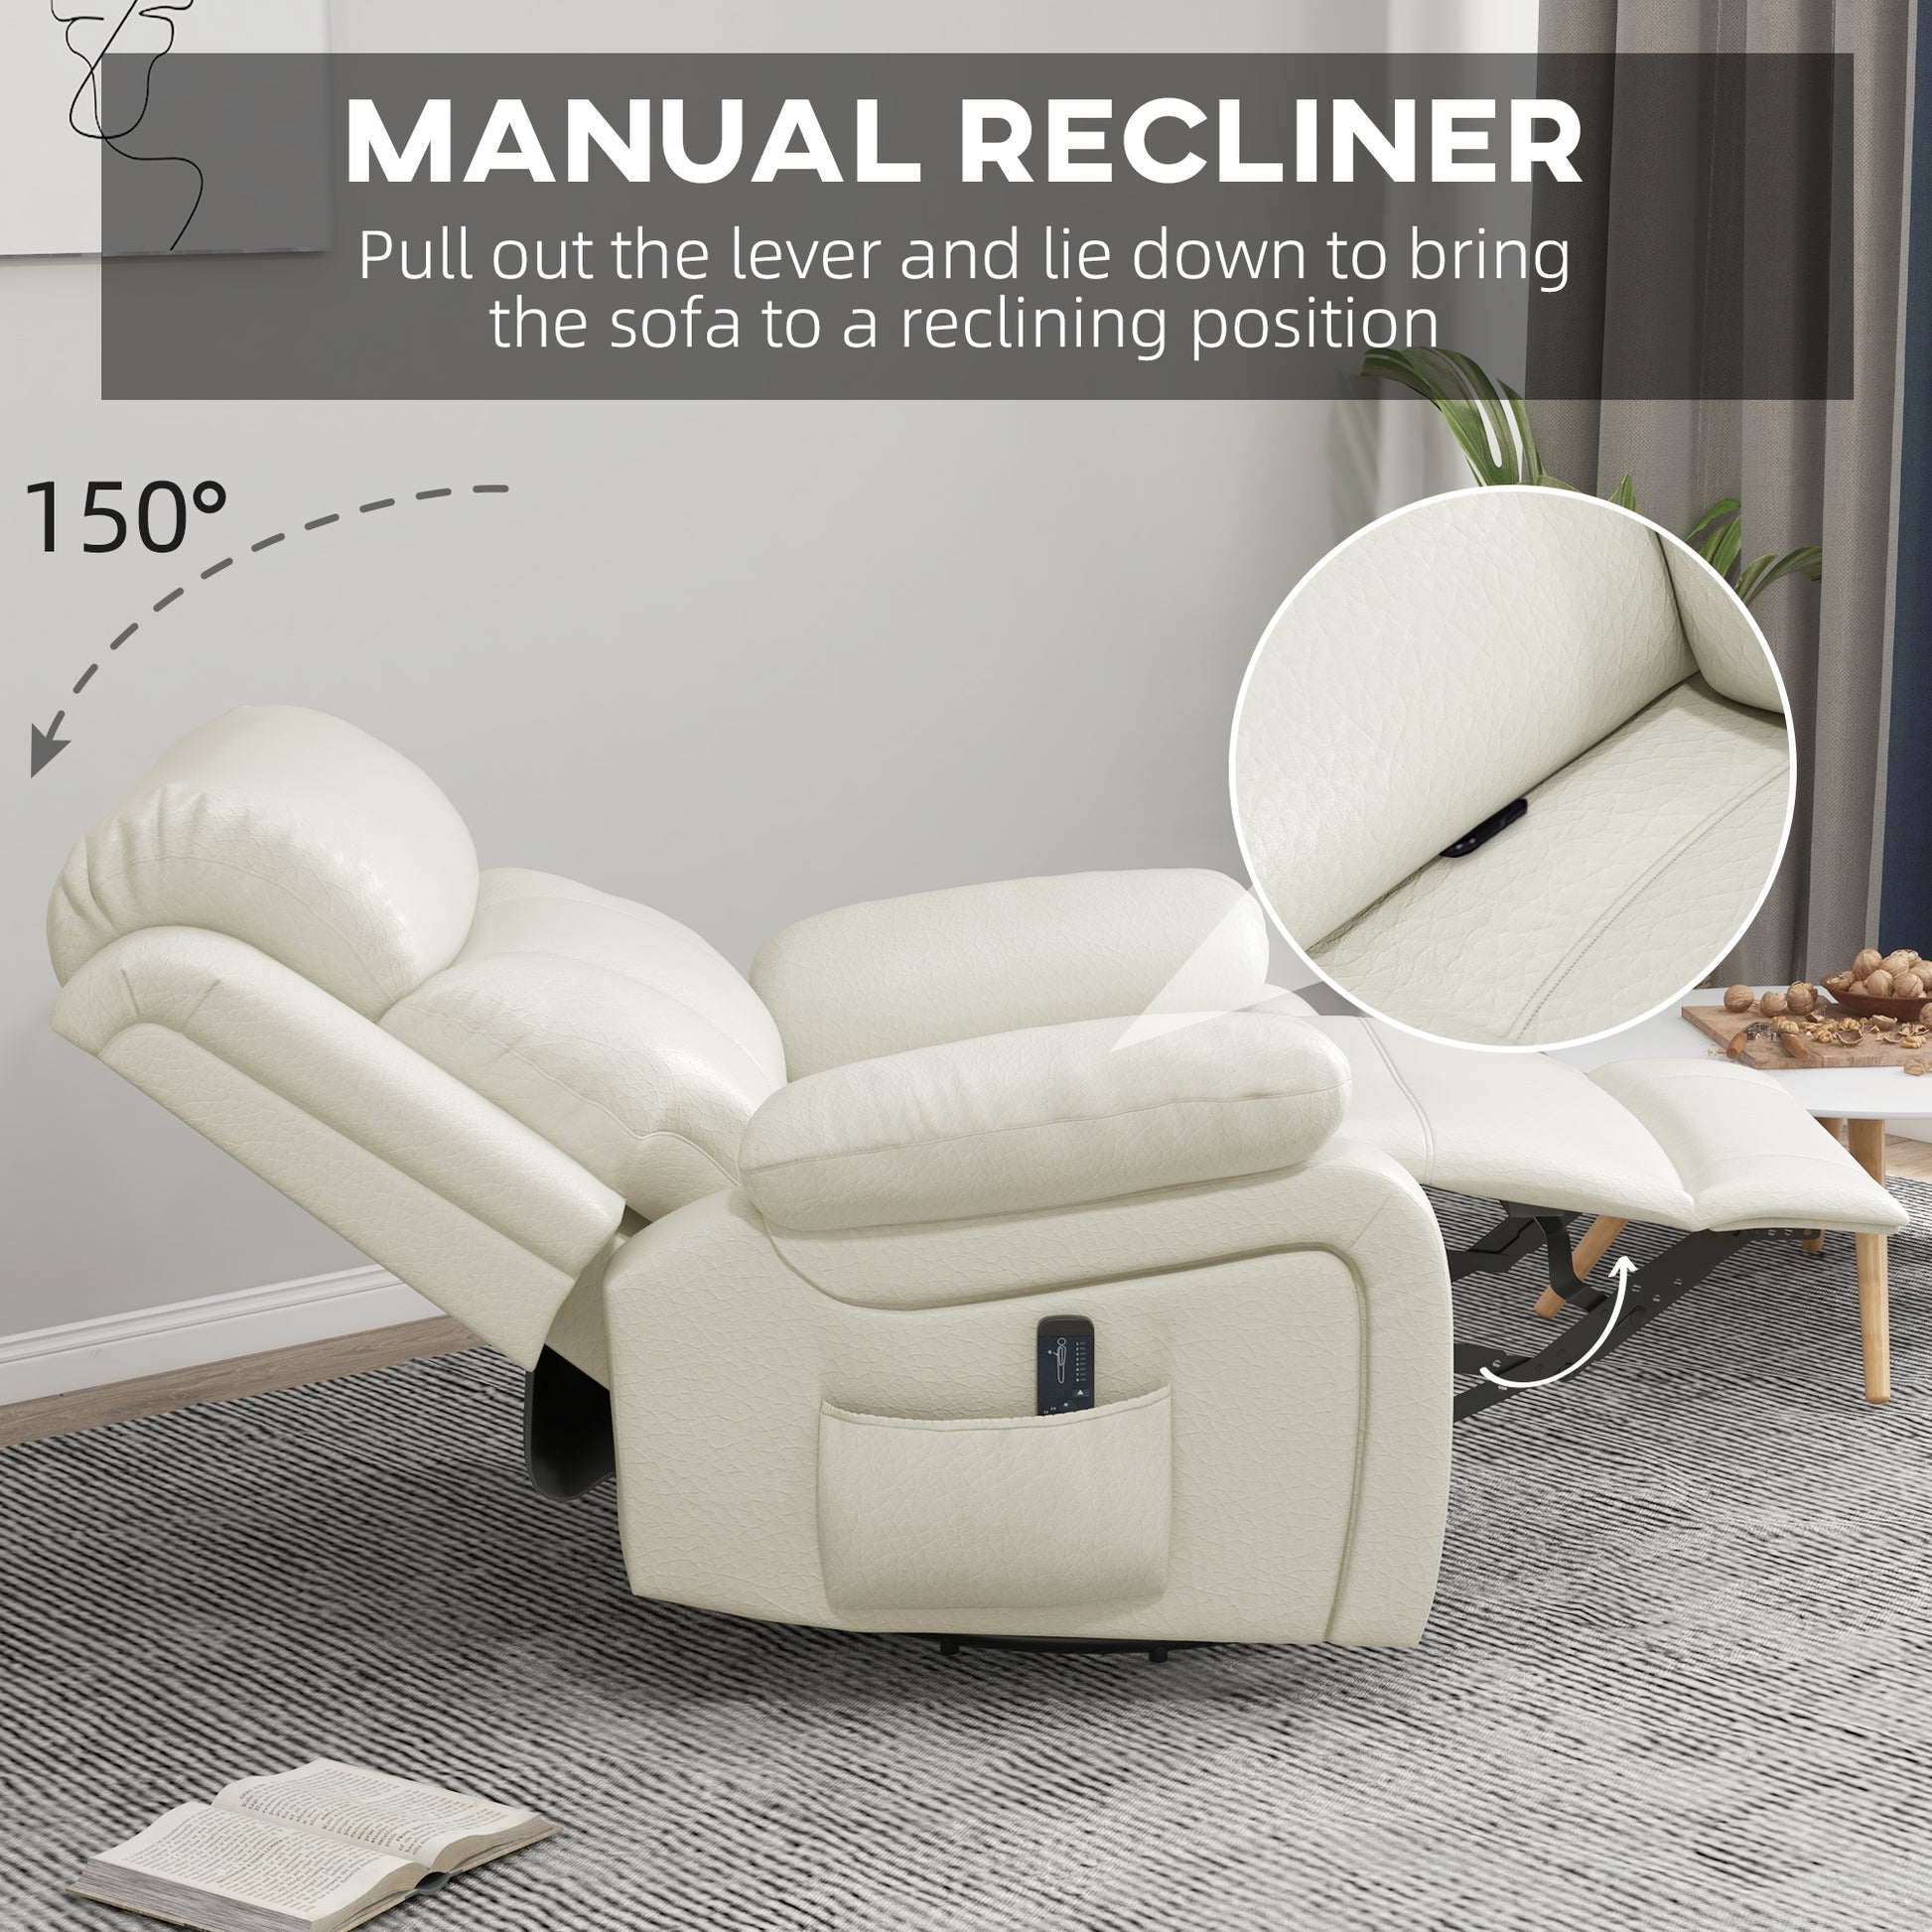 PU Leather Reclining Chair with Vibration Massage Recliner, Swivel Base, Rocking Function, Remote Control, Cream White - Gallery Canada